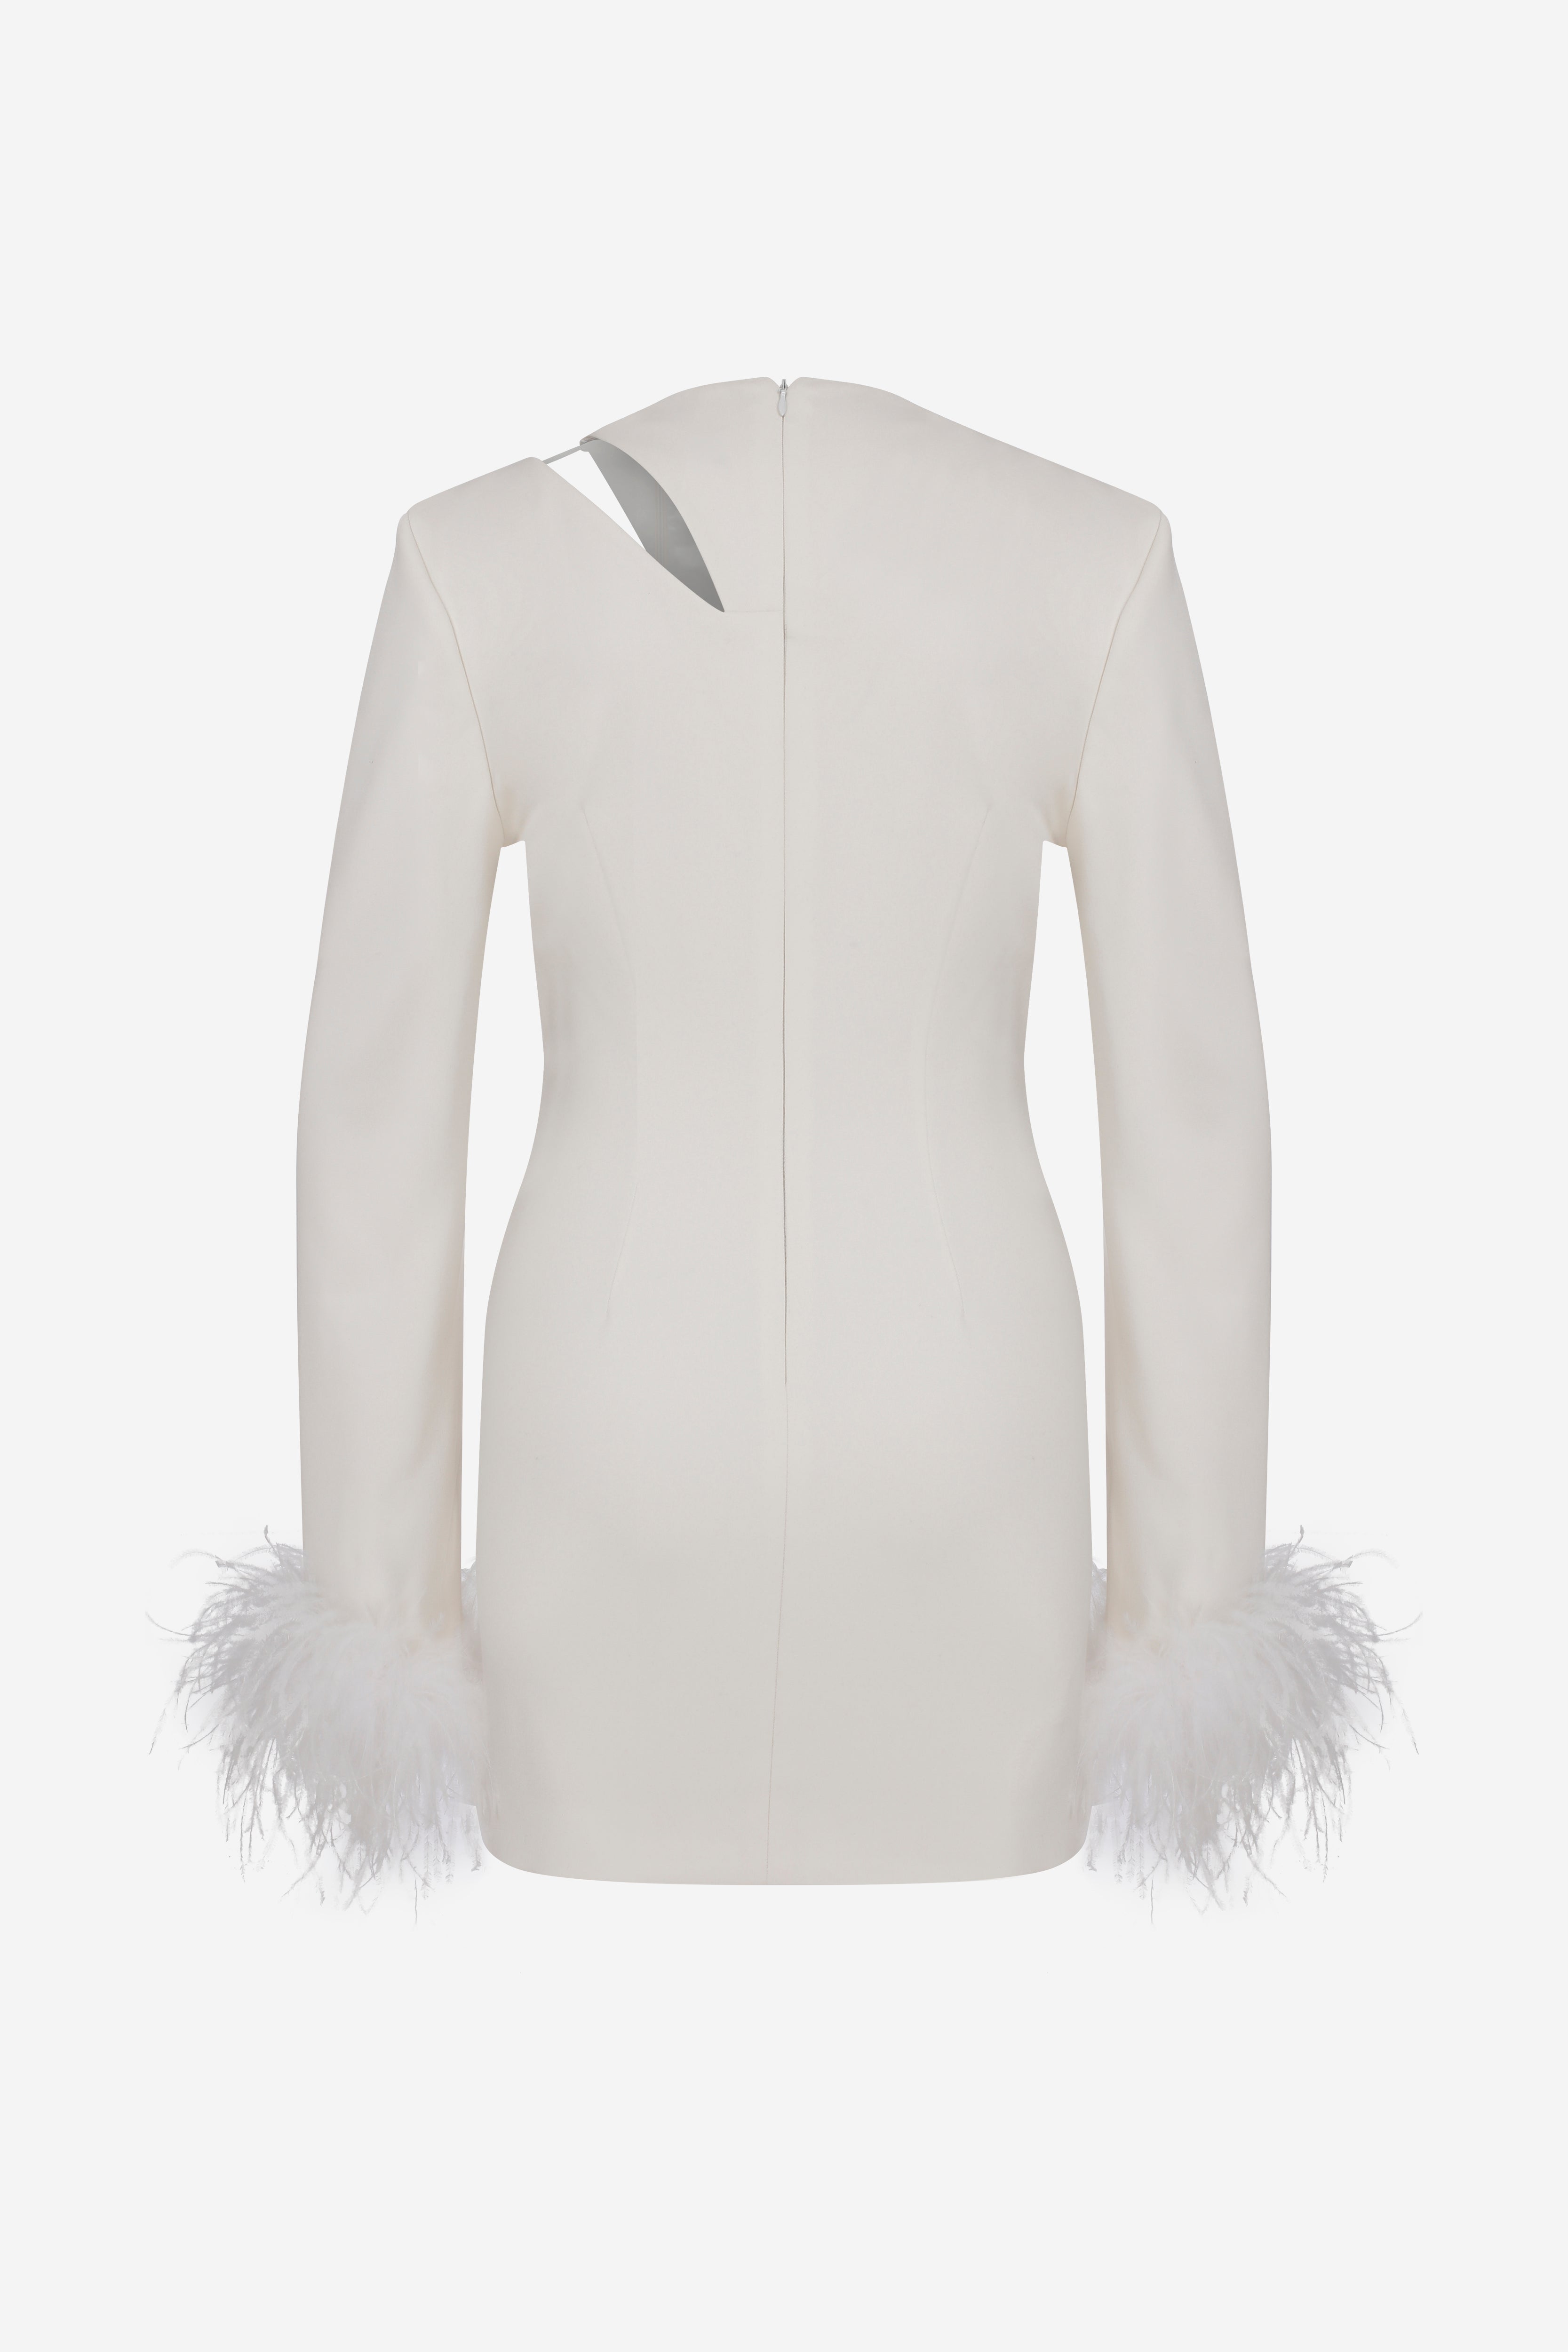 Audrey - Mini Dress with Cutout Details on Shoulder and Feather Trim on Sleeves